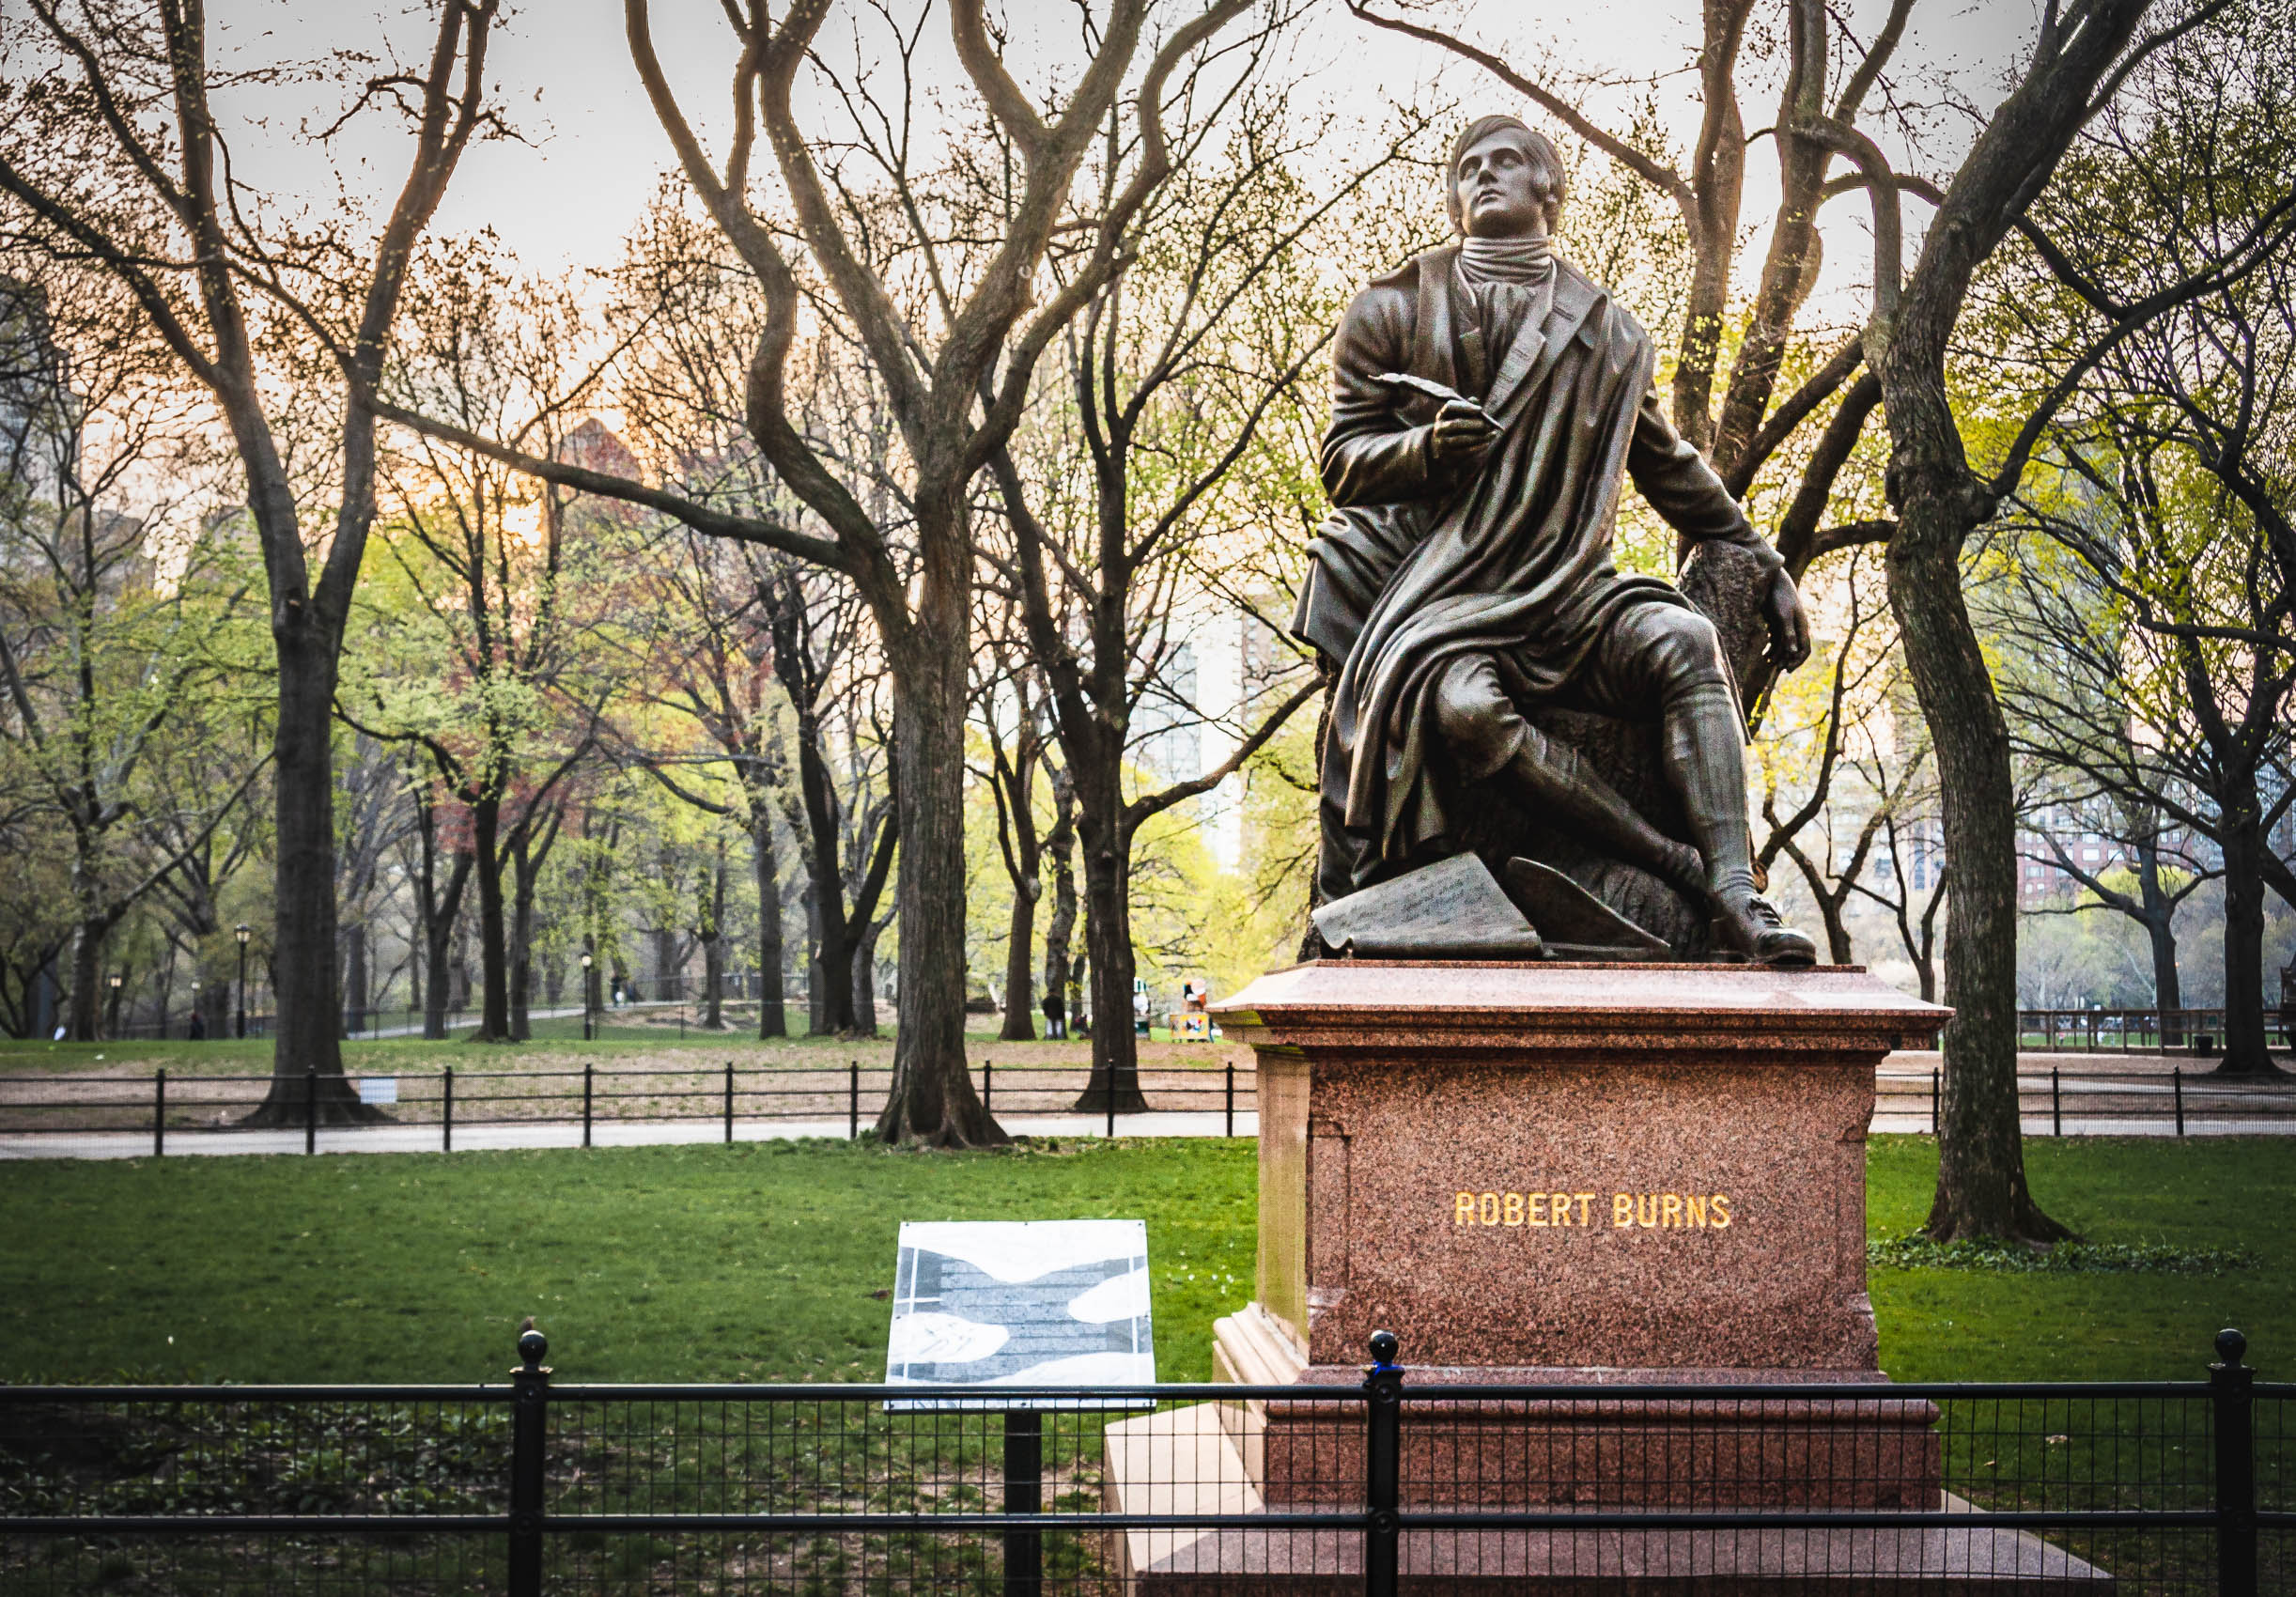 Statue of Robert Burns in Central Park, New York City NY021